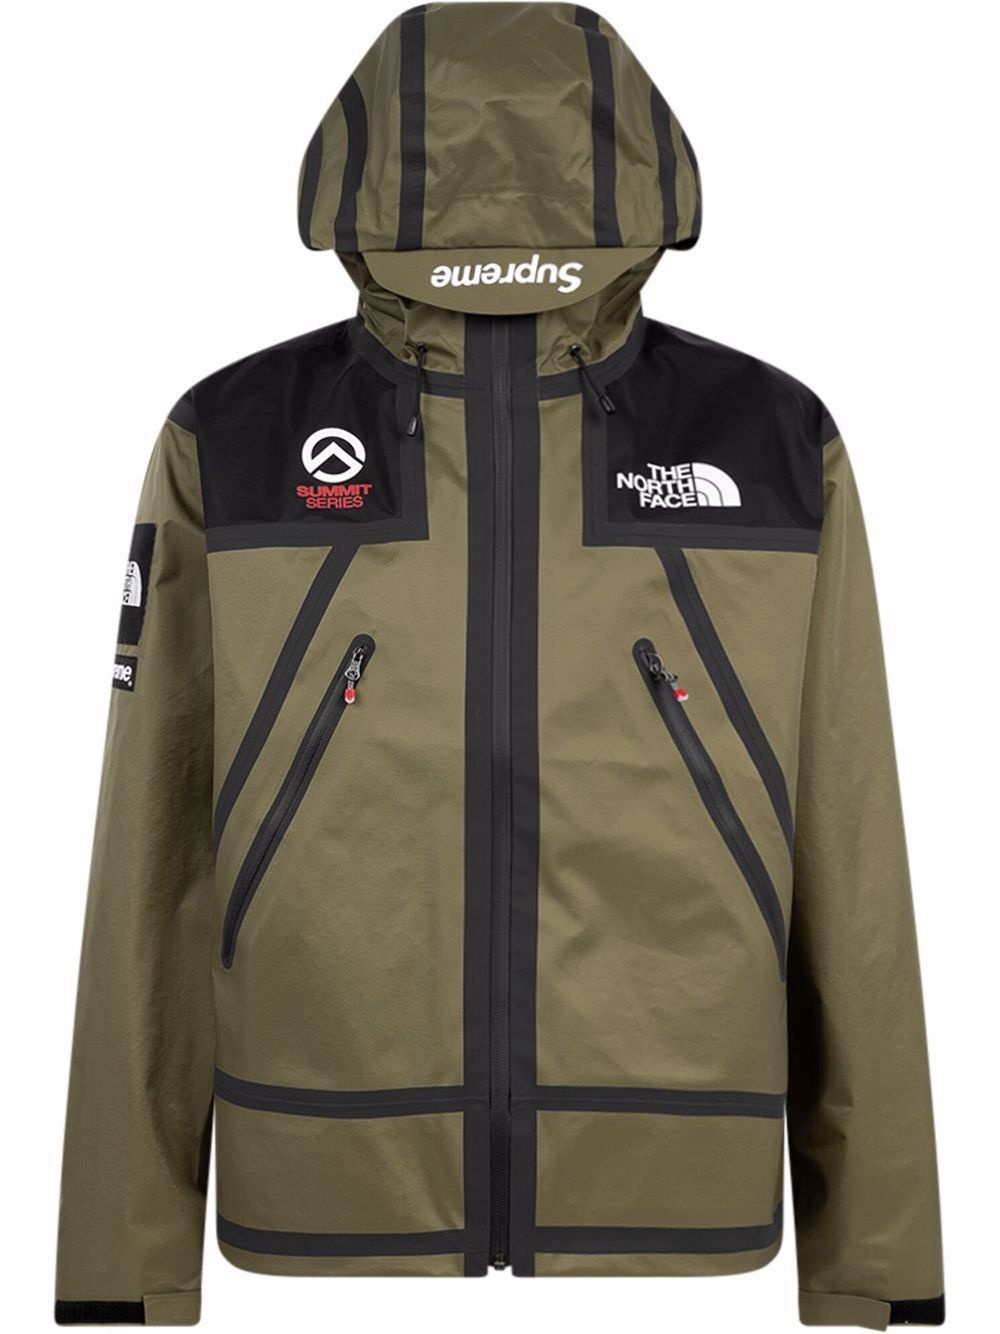 x The North Face tape seam jacket - 1